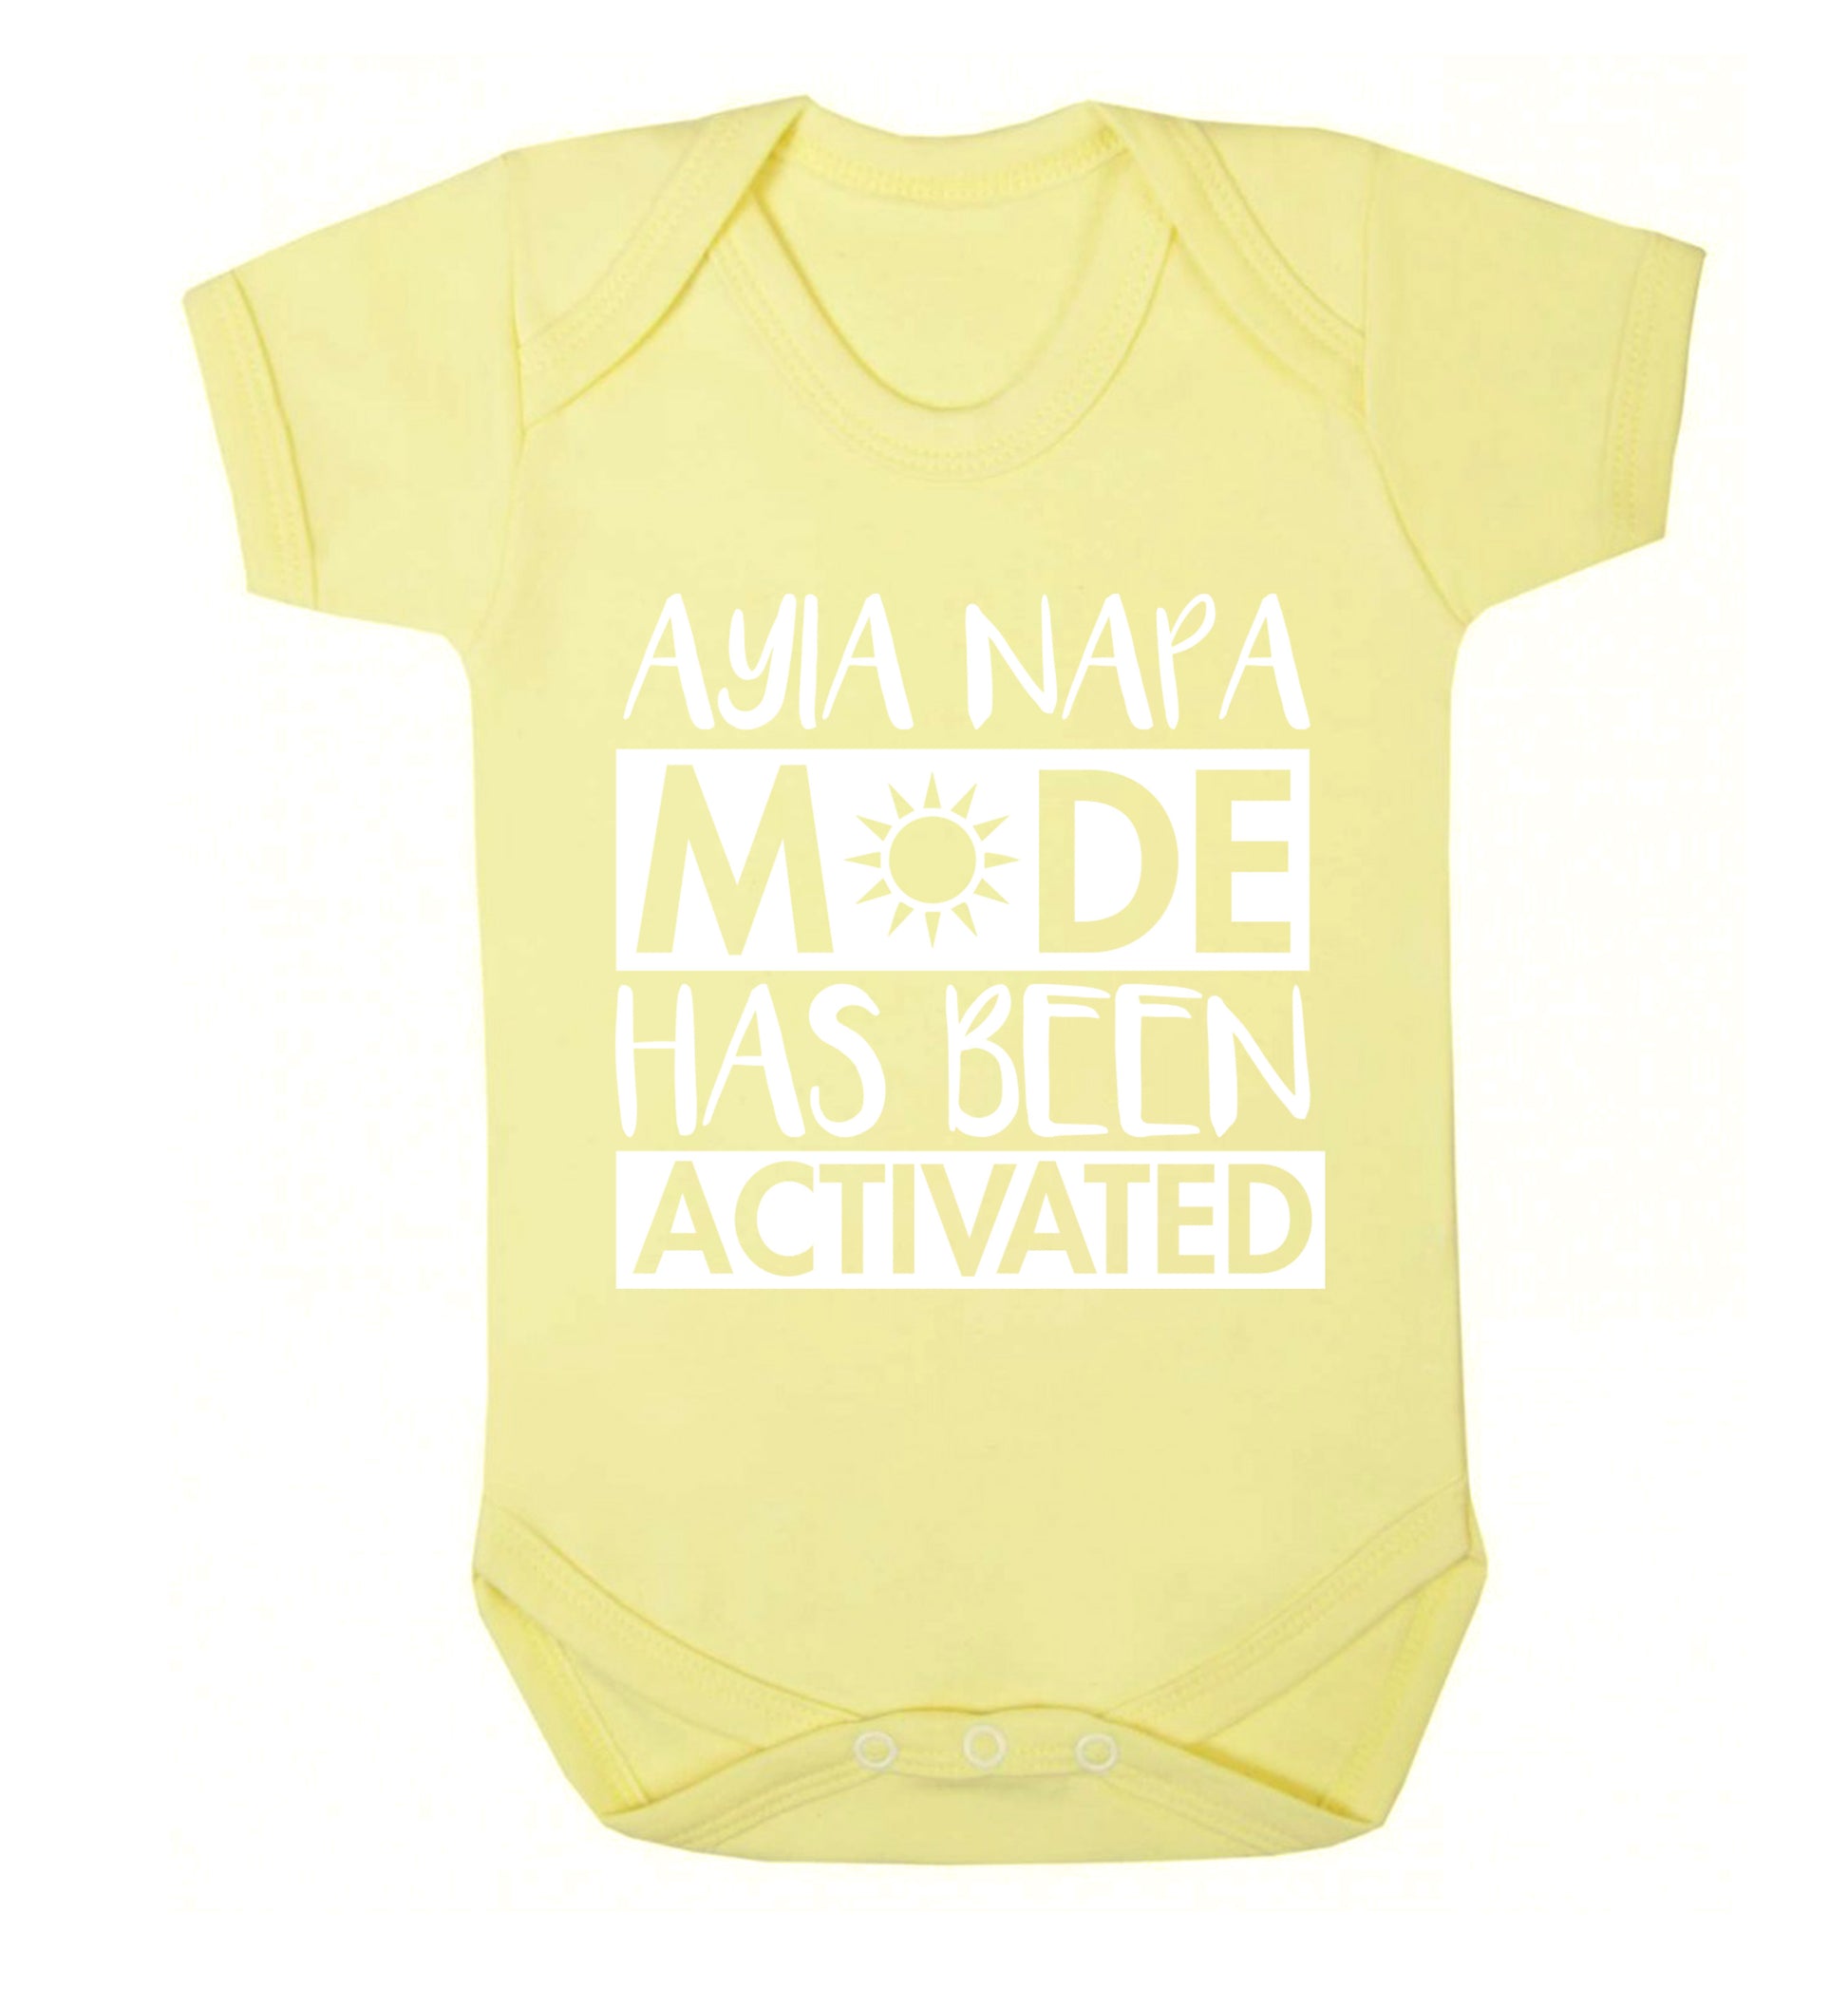 Ayia Napa mode has been activated Baby Vest pale yellow 18-24 months